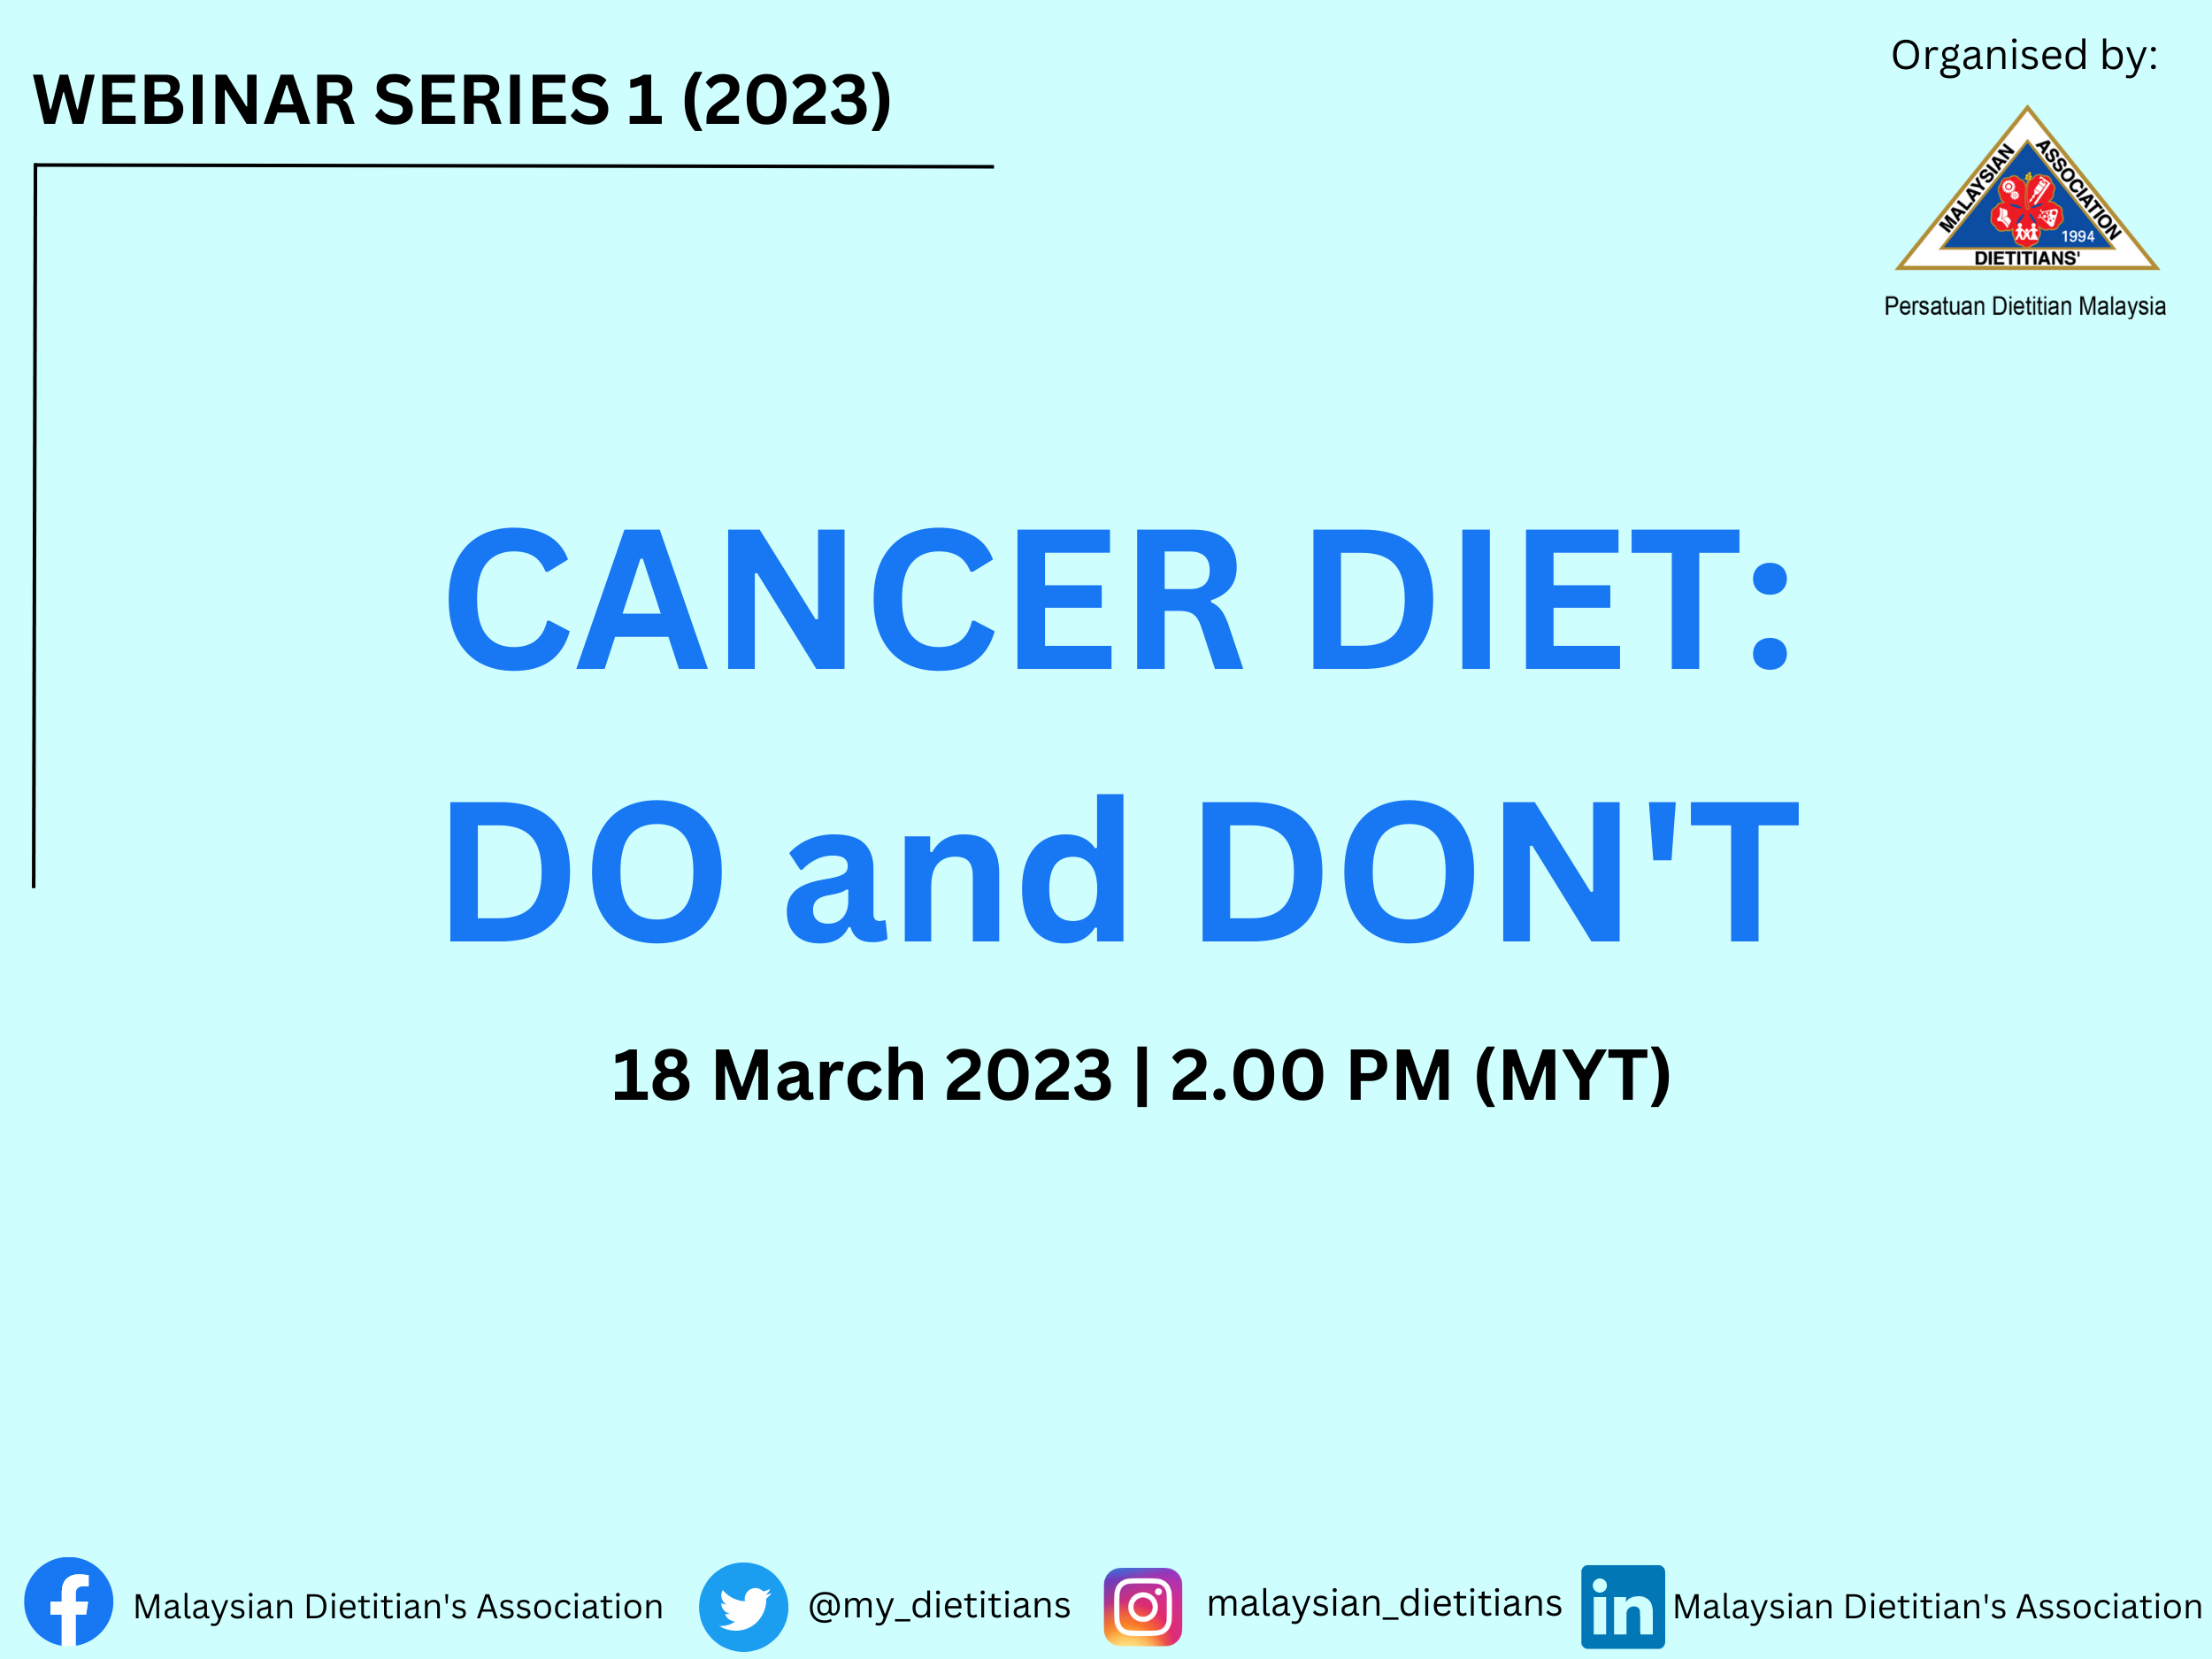 Cancer Diet: Do and Don't and What's New